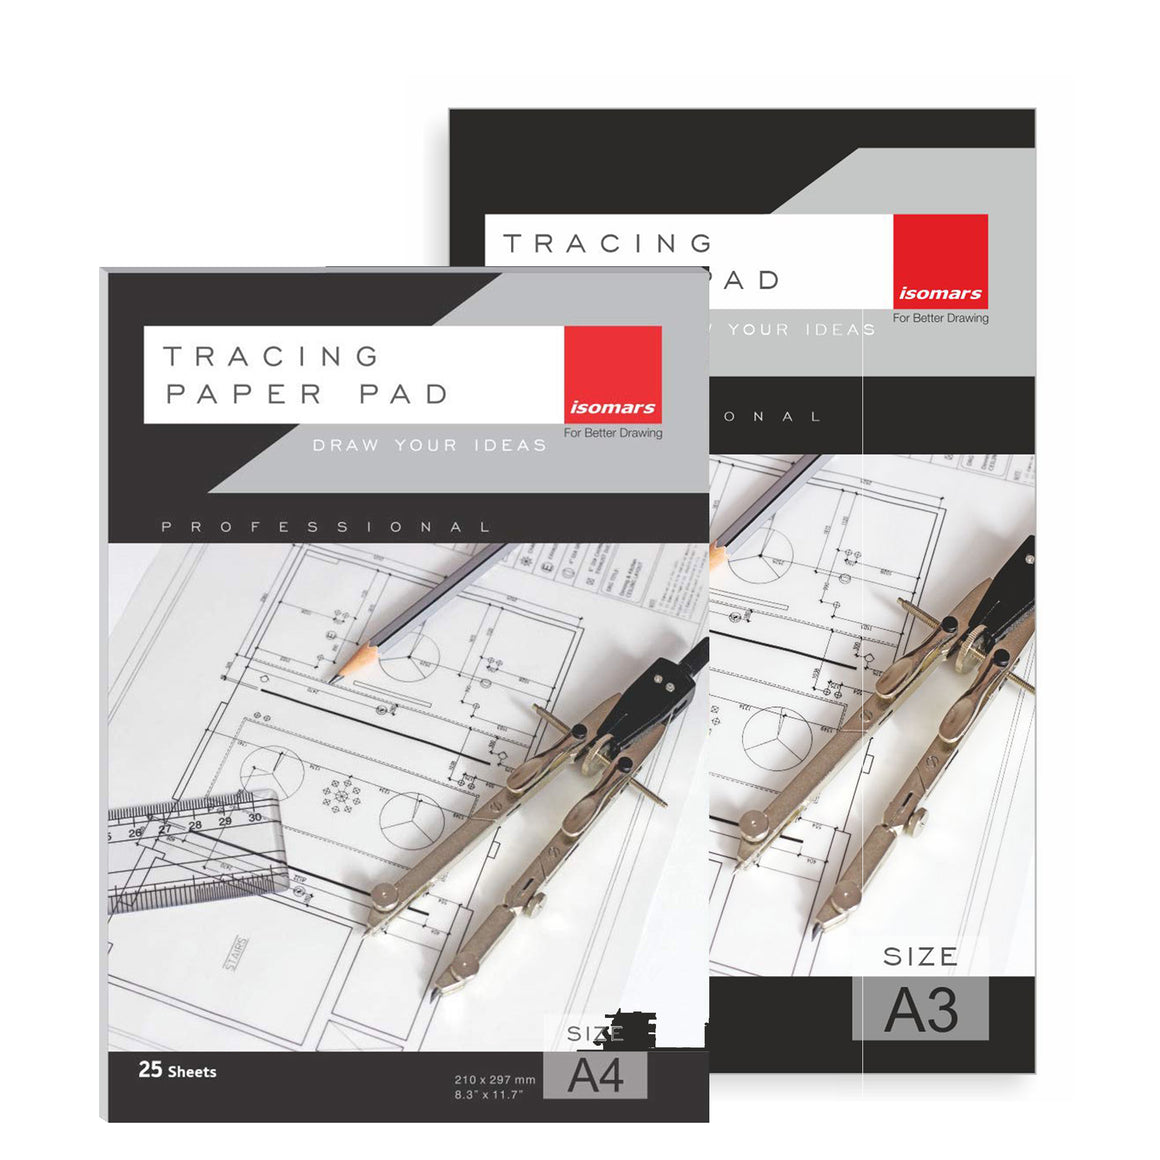 Isomars Tracing Paper Pad - A4 and A3 Pad Combo